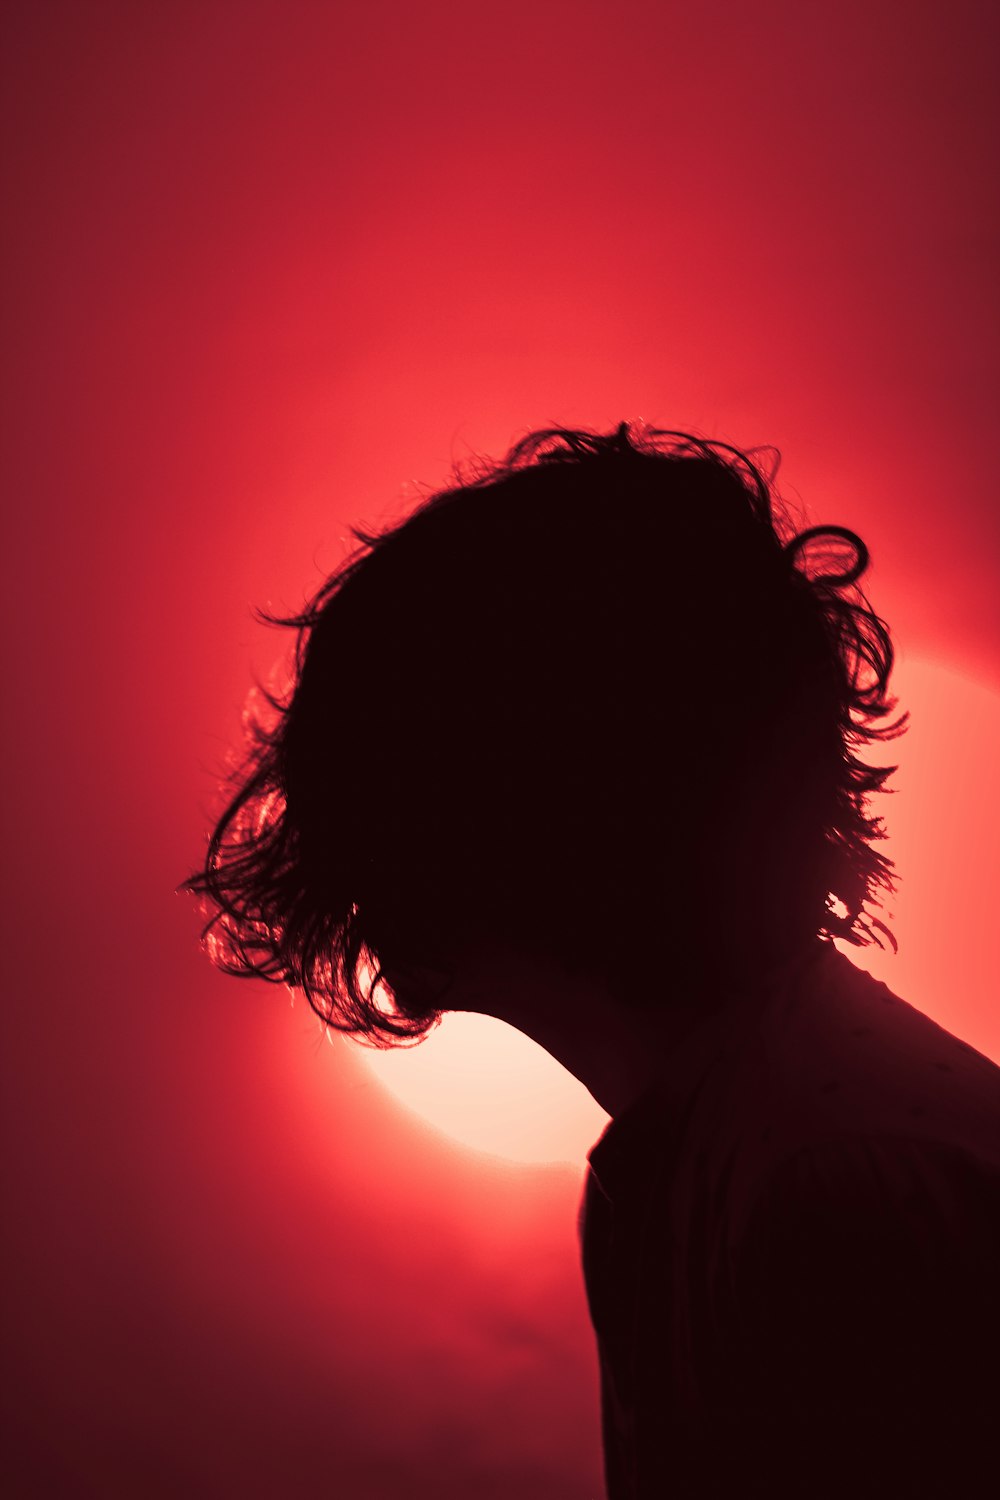 silhouette of person with black hair